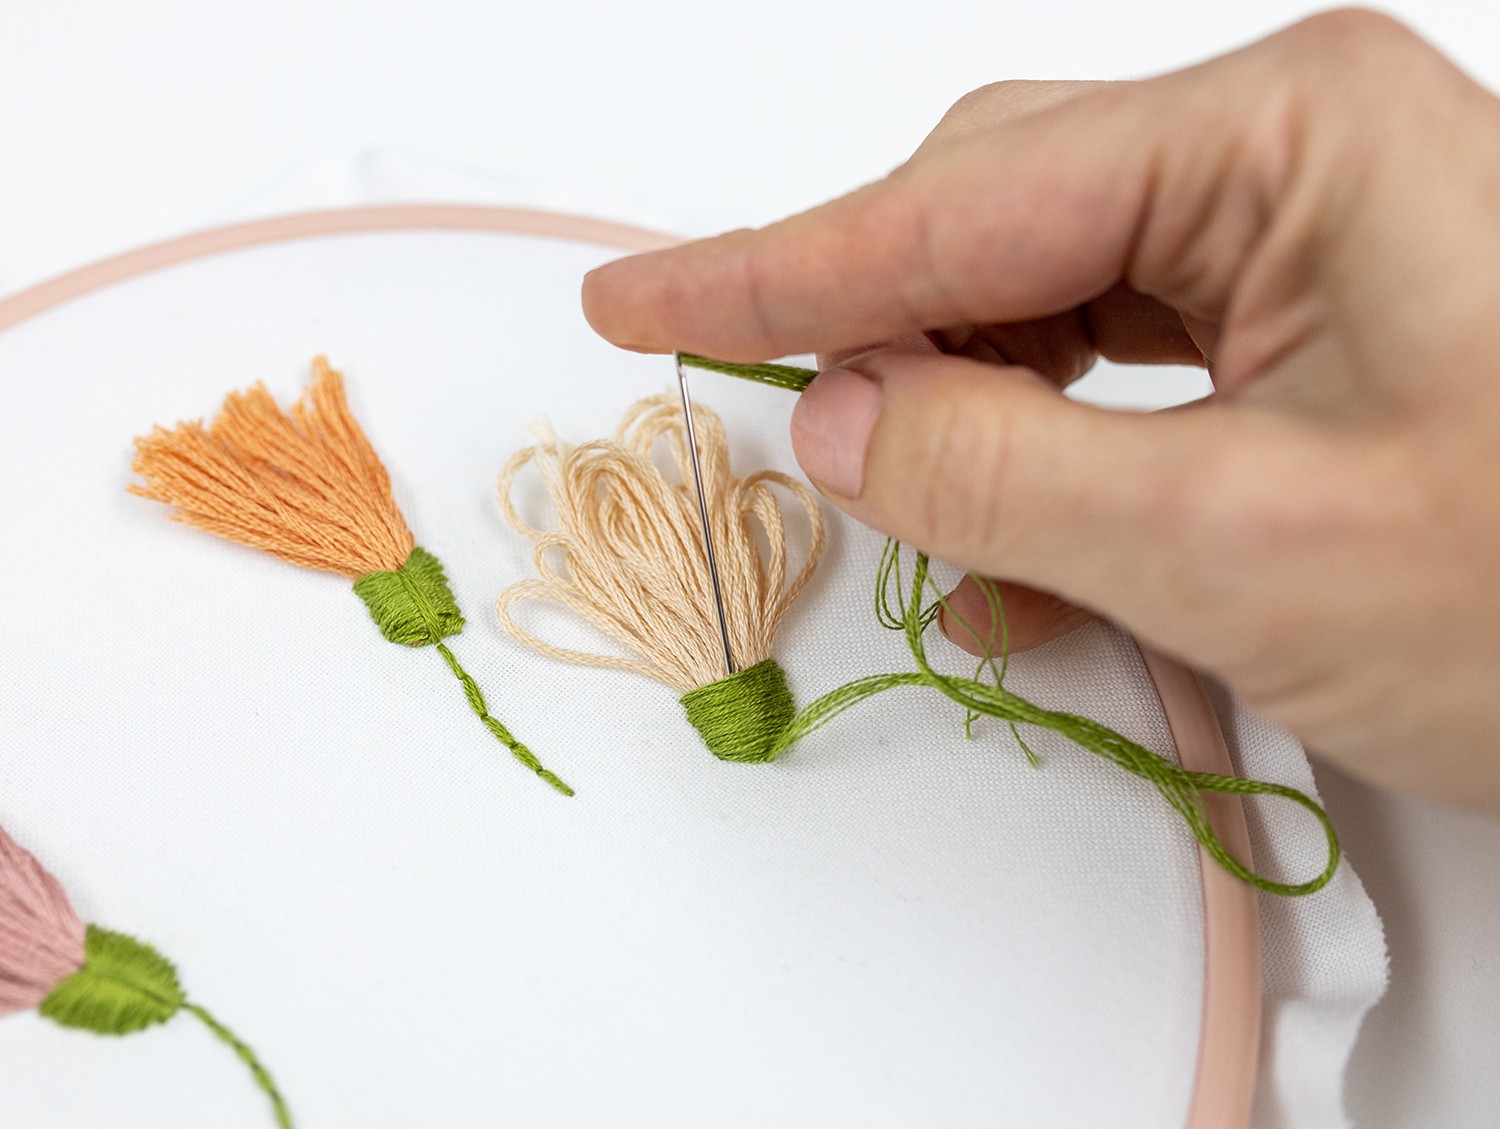 Thread Bundle Flowers - Learn How to do This Modern Embroidery